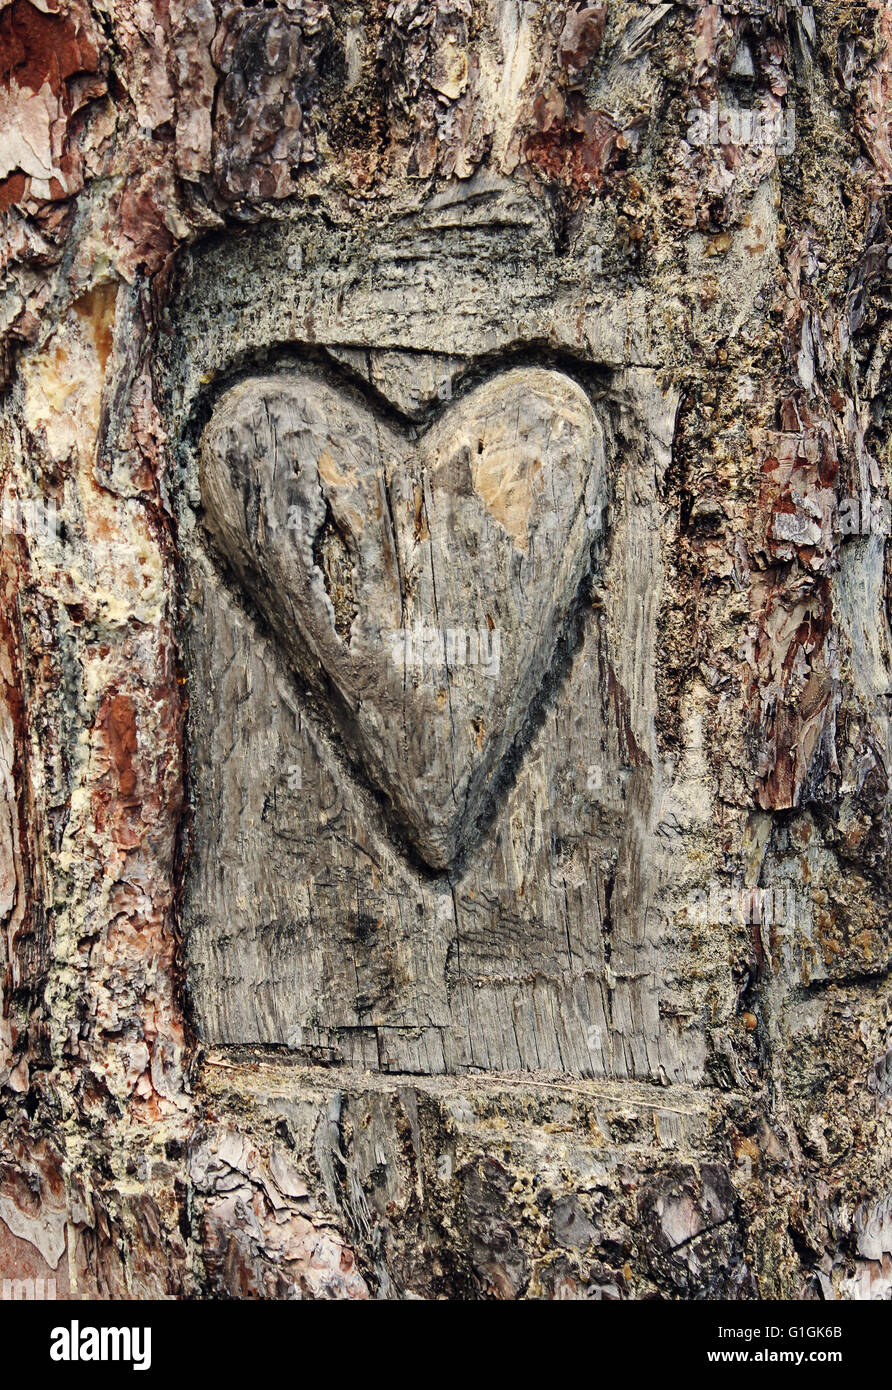 Heart carved in the bark of a tree, symbol of love Stock Photo